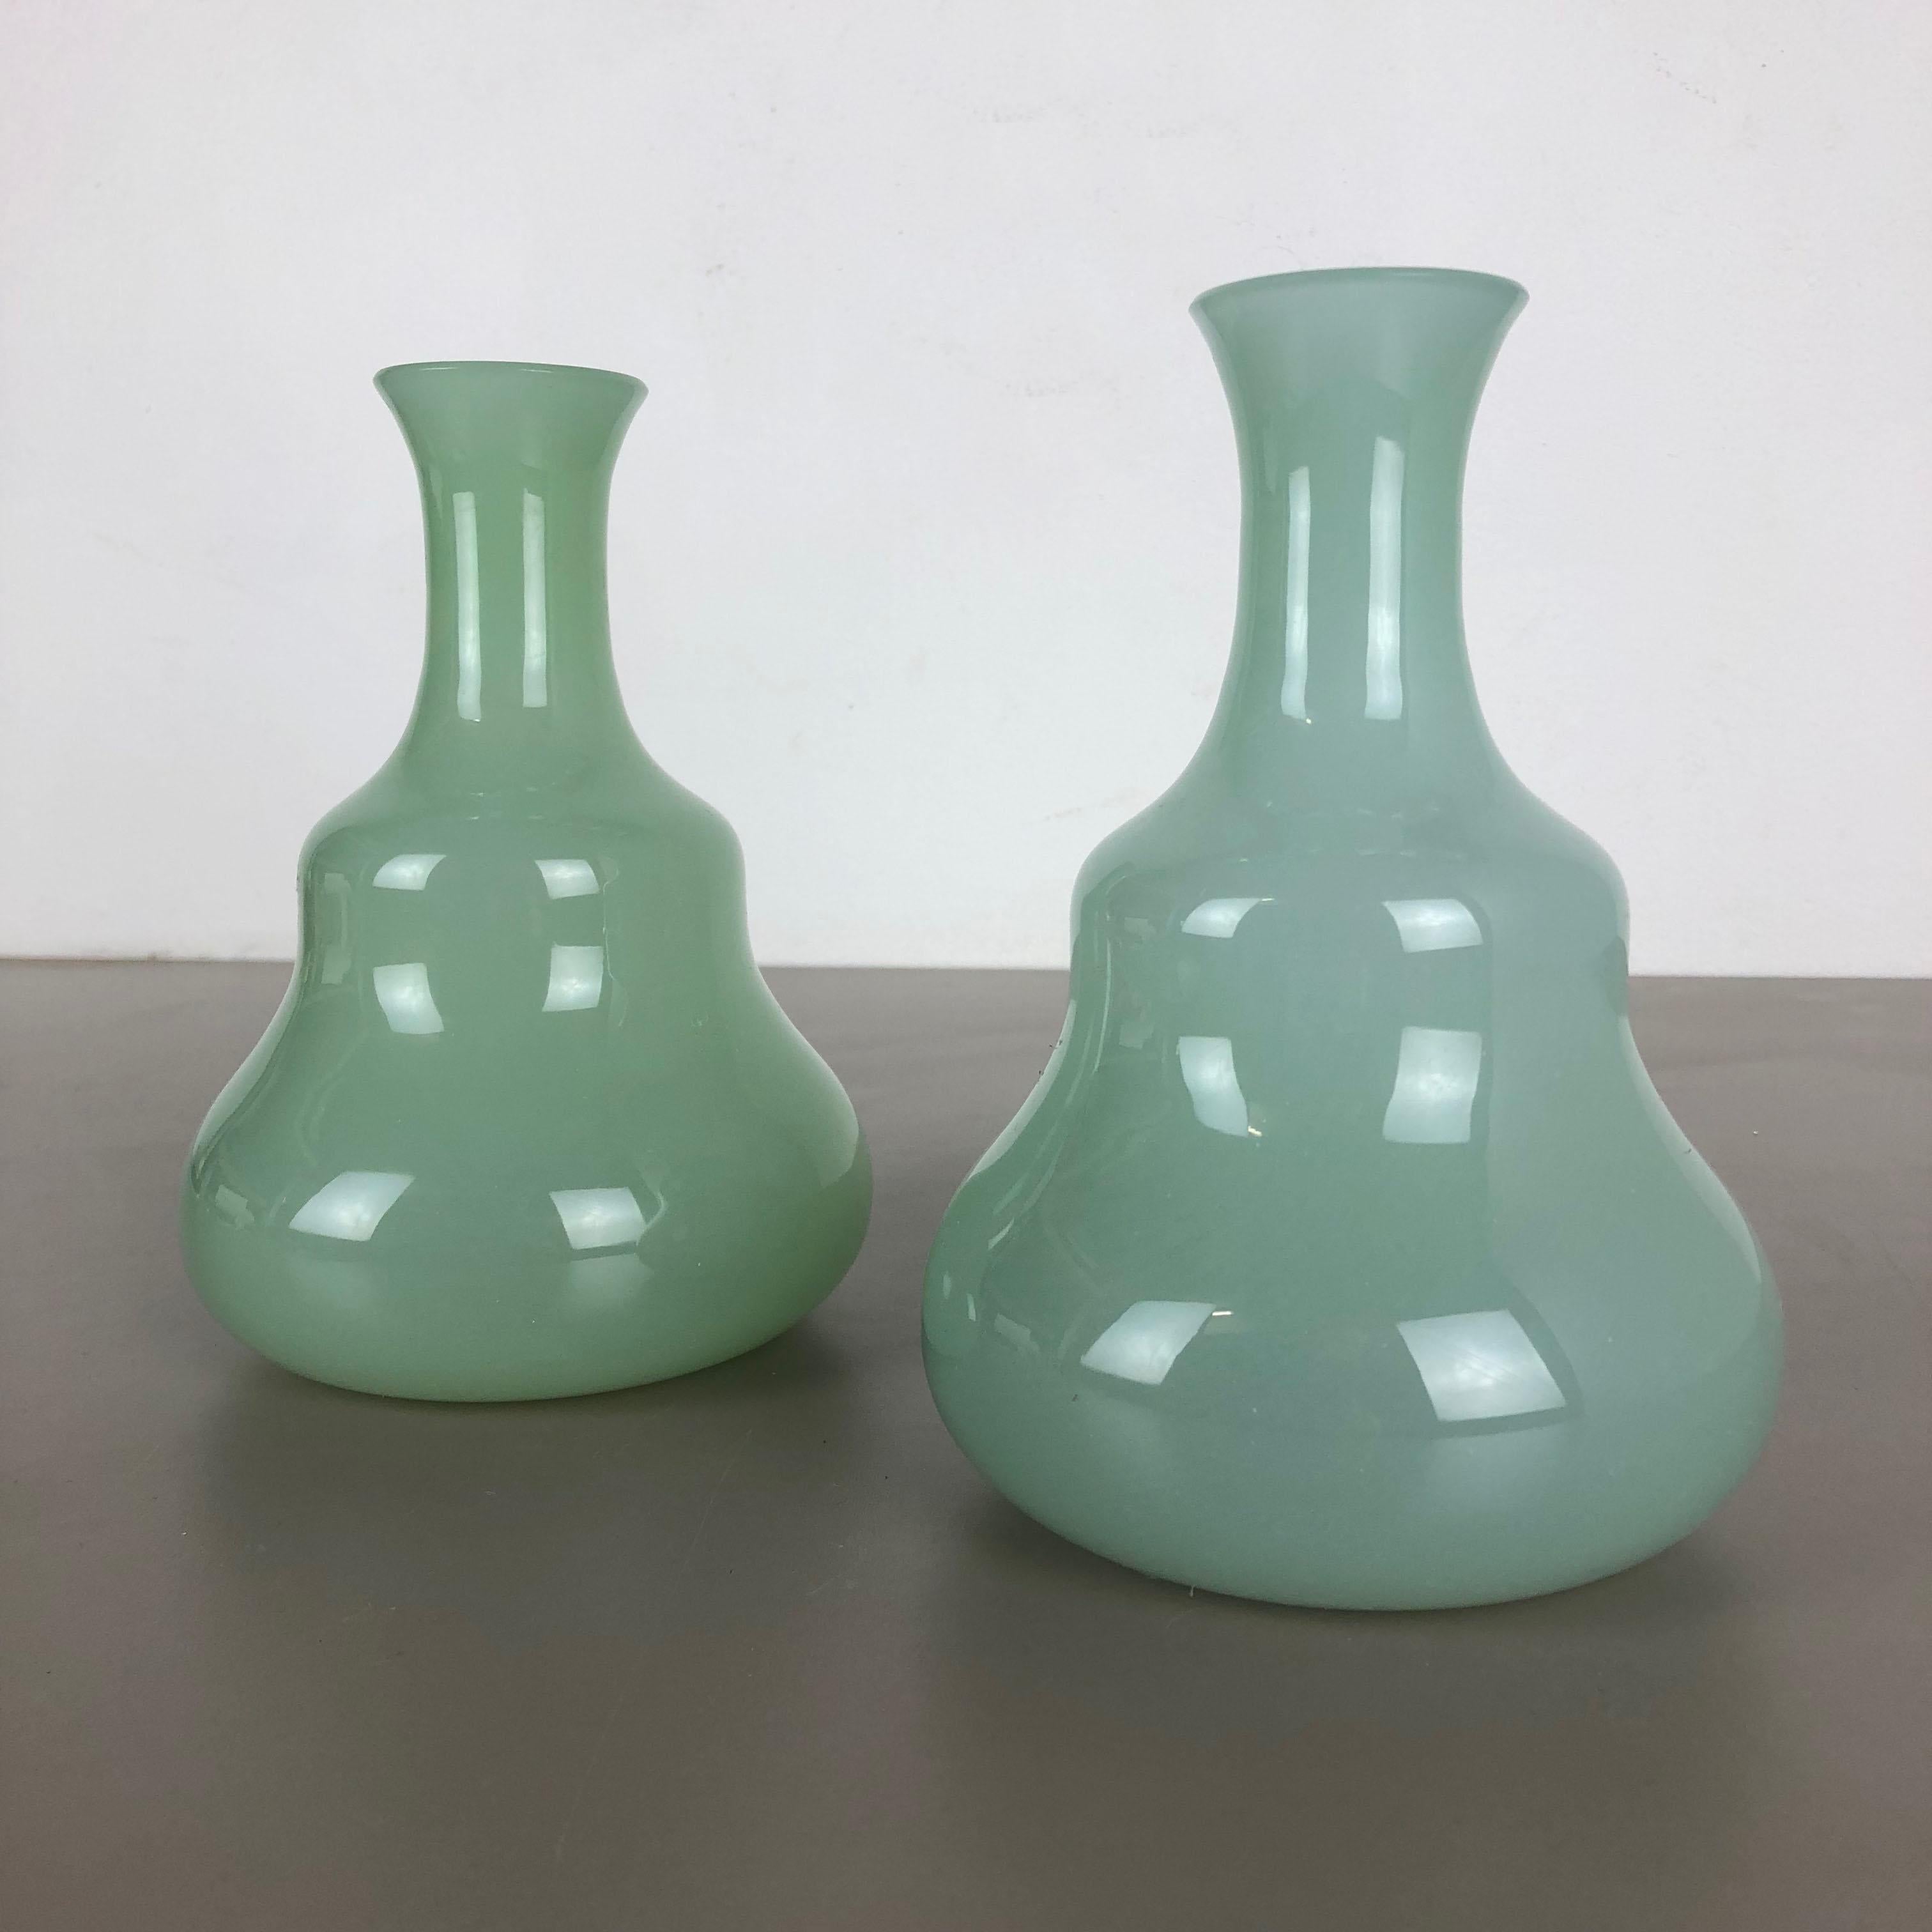 Italian Set of 2 New Old Stock Murano Opaline Glass Vases by Gino Cenedese, 1960s